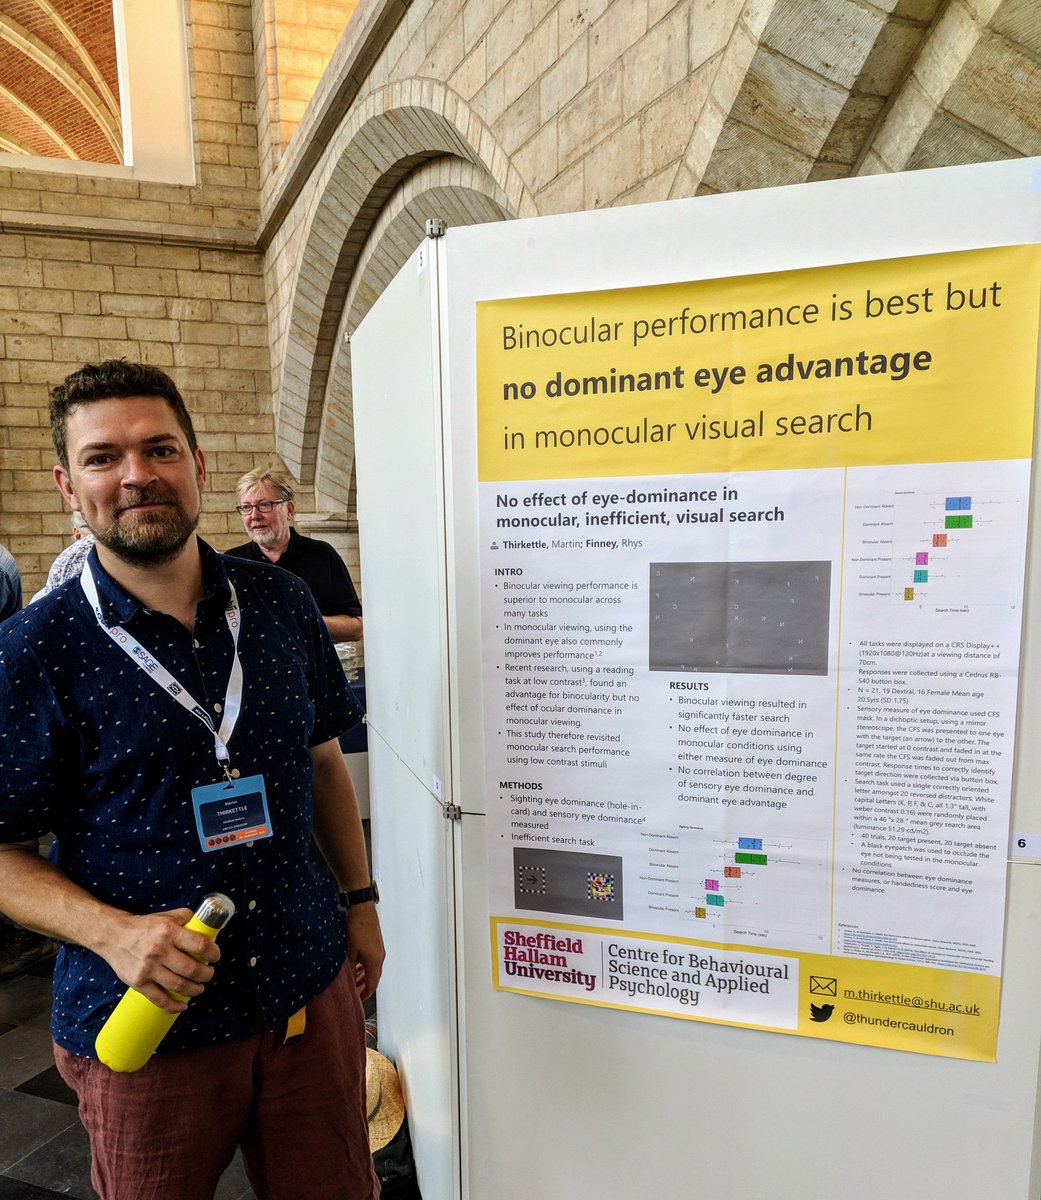 Two eyes are better than (either) one!
Presenting @CeBSAP research at #ECVP2019